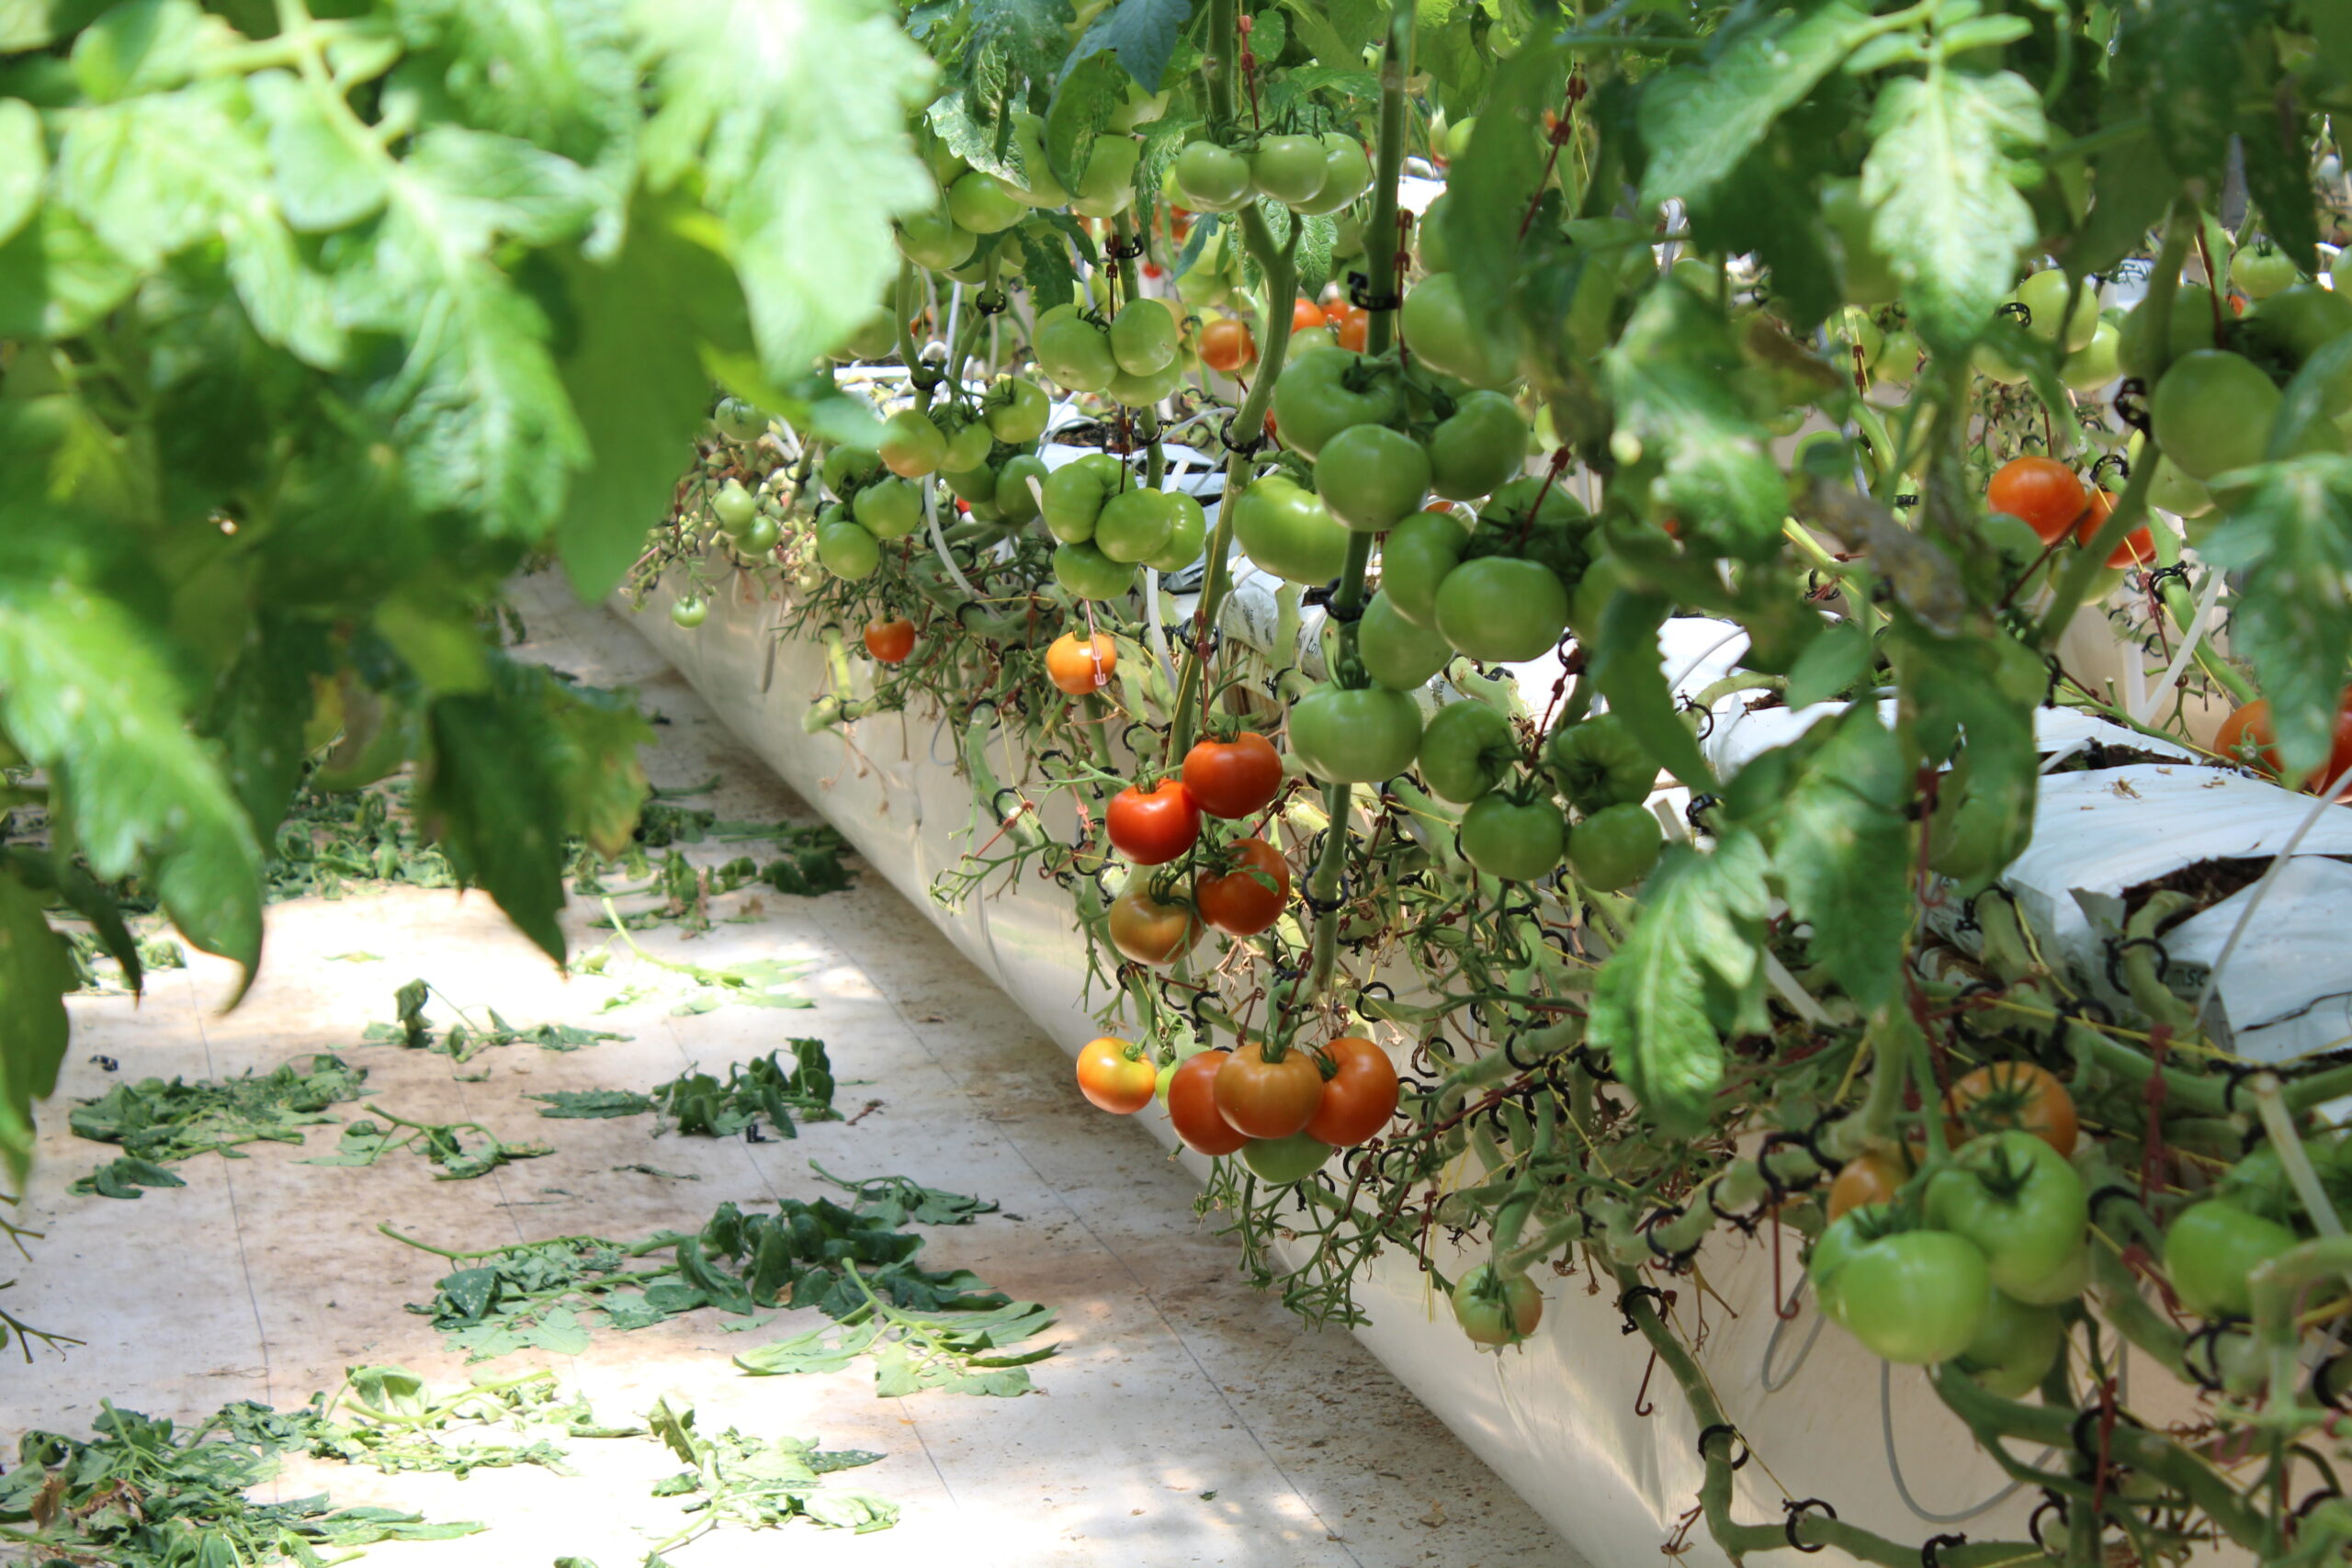 A greenhouse with rows of tomato plants. The plants have clusters of ripe red and unripe green tomatoes hanging from the vines. The ground is covered with scattered green leaves. Sunlight filters through the foliage, illuminating the tomatoes and leaves, much like finding a cozy spot for coffee in Duluth.